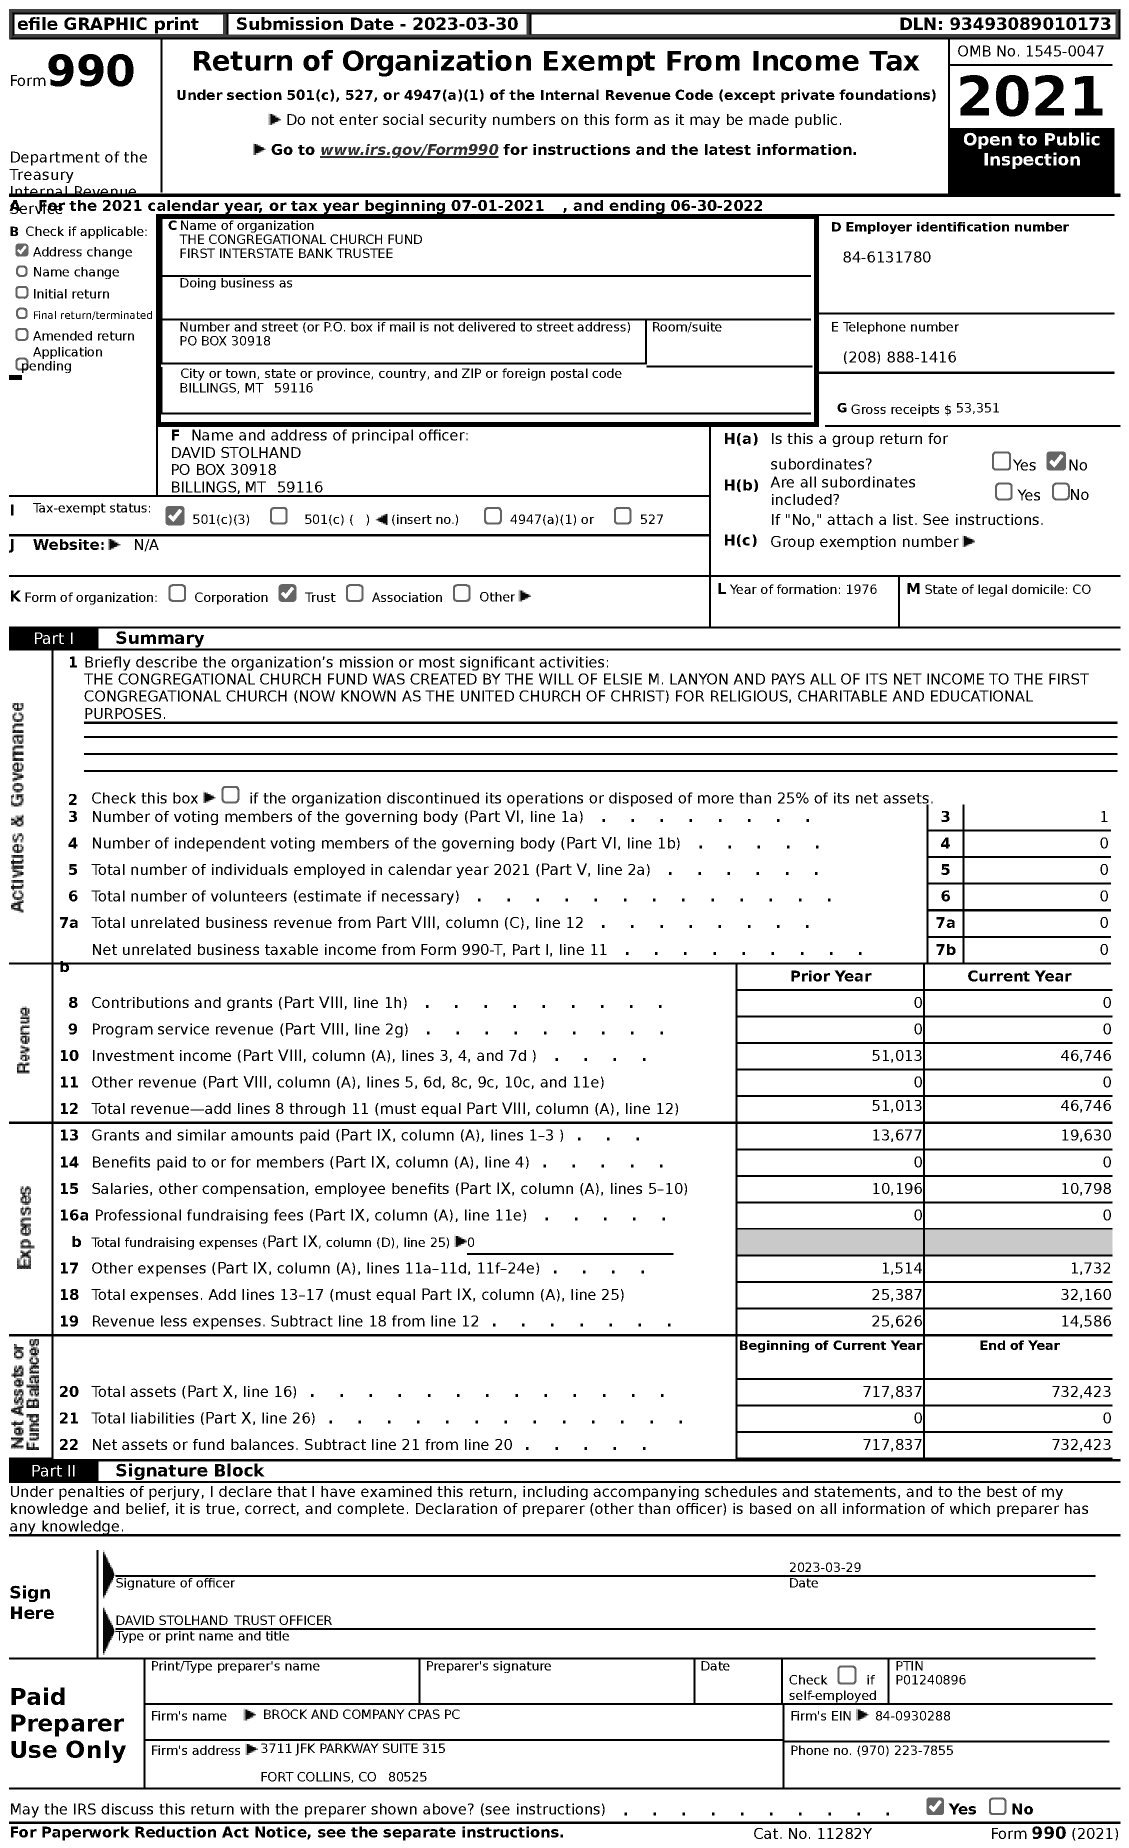 Image of first page of 2021 Form 990 for The Congregational Church Fund First Interstate Bank Trustee